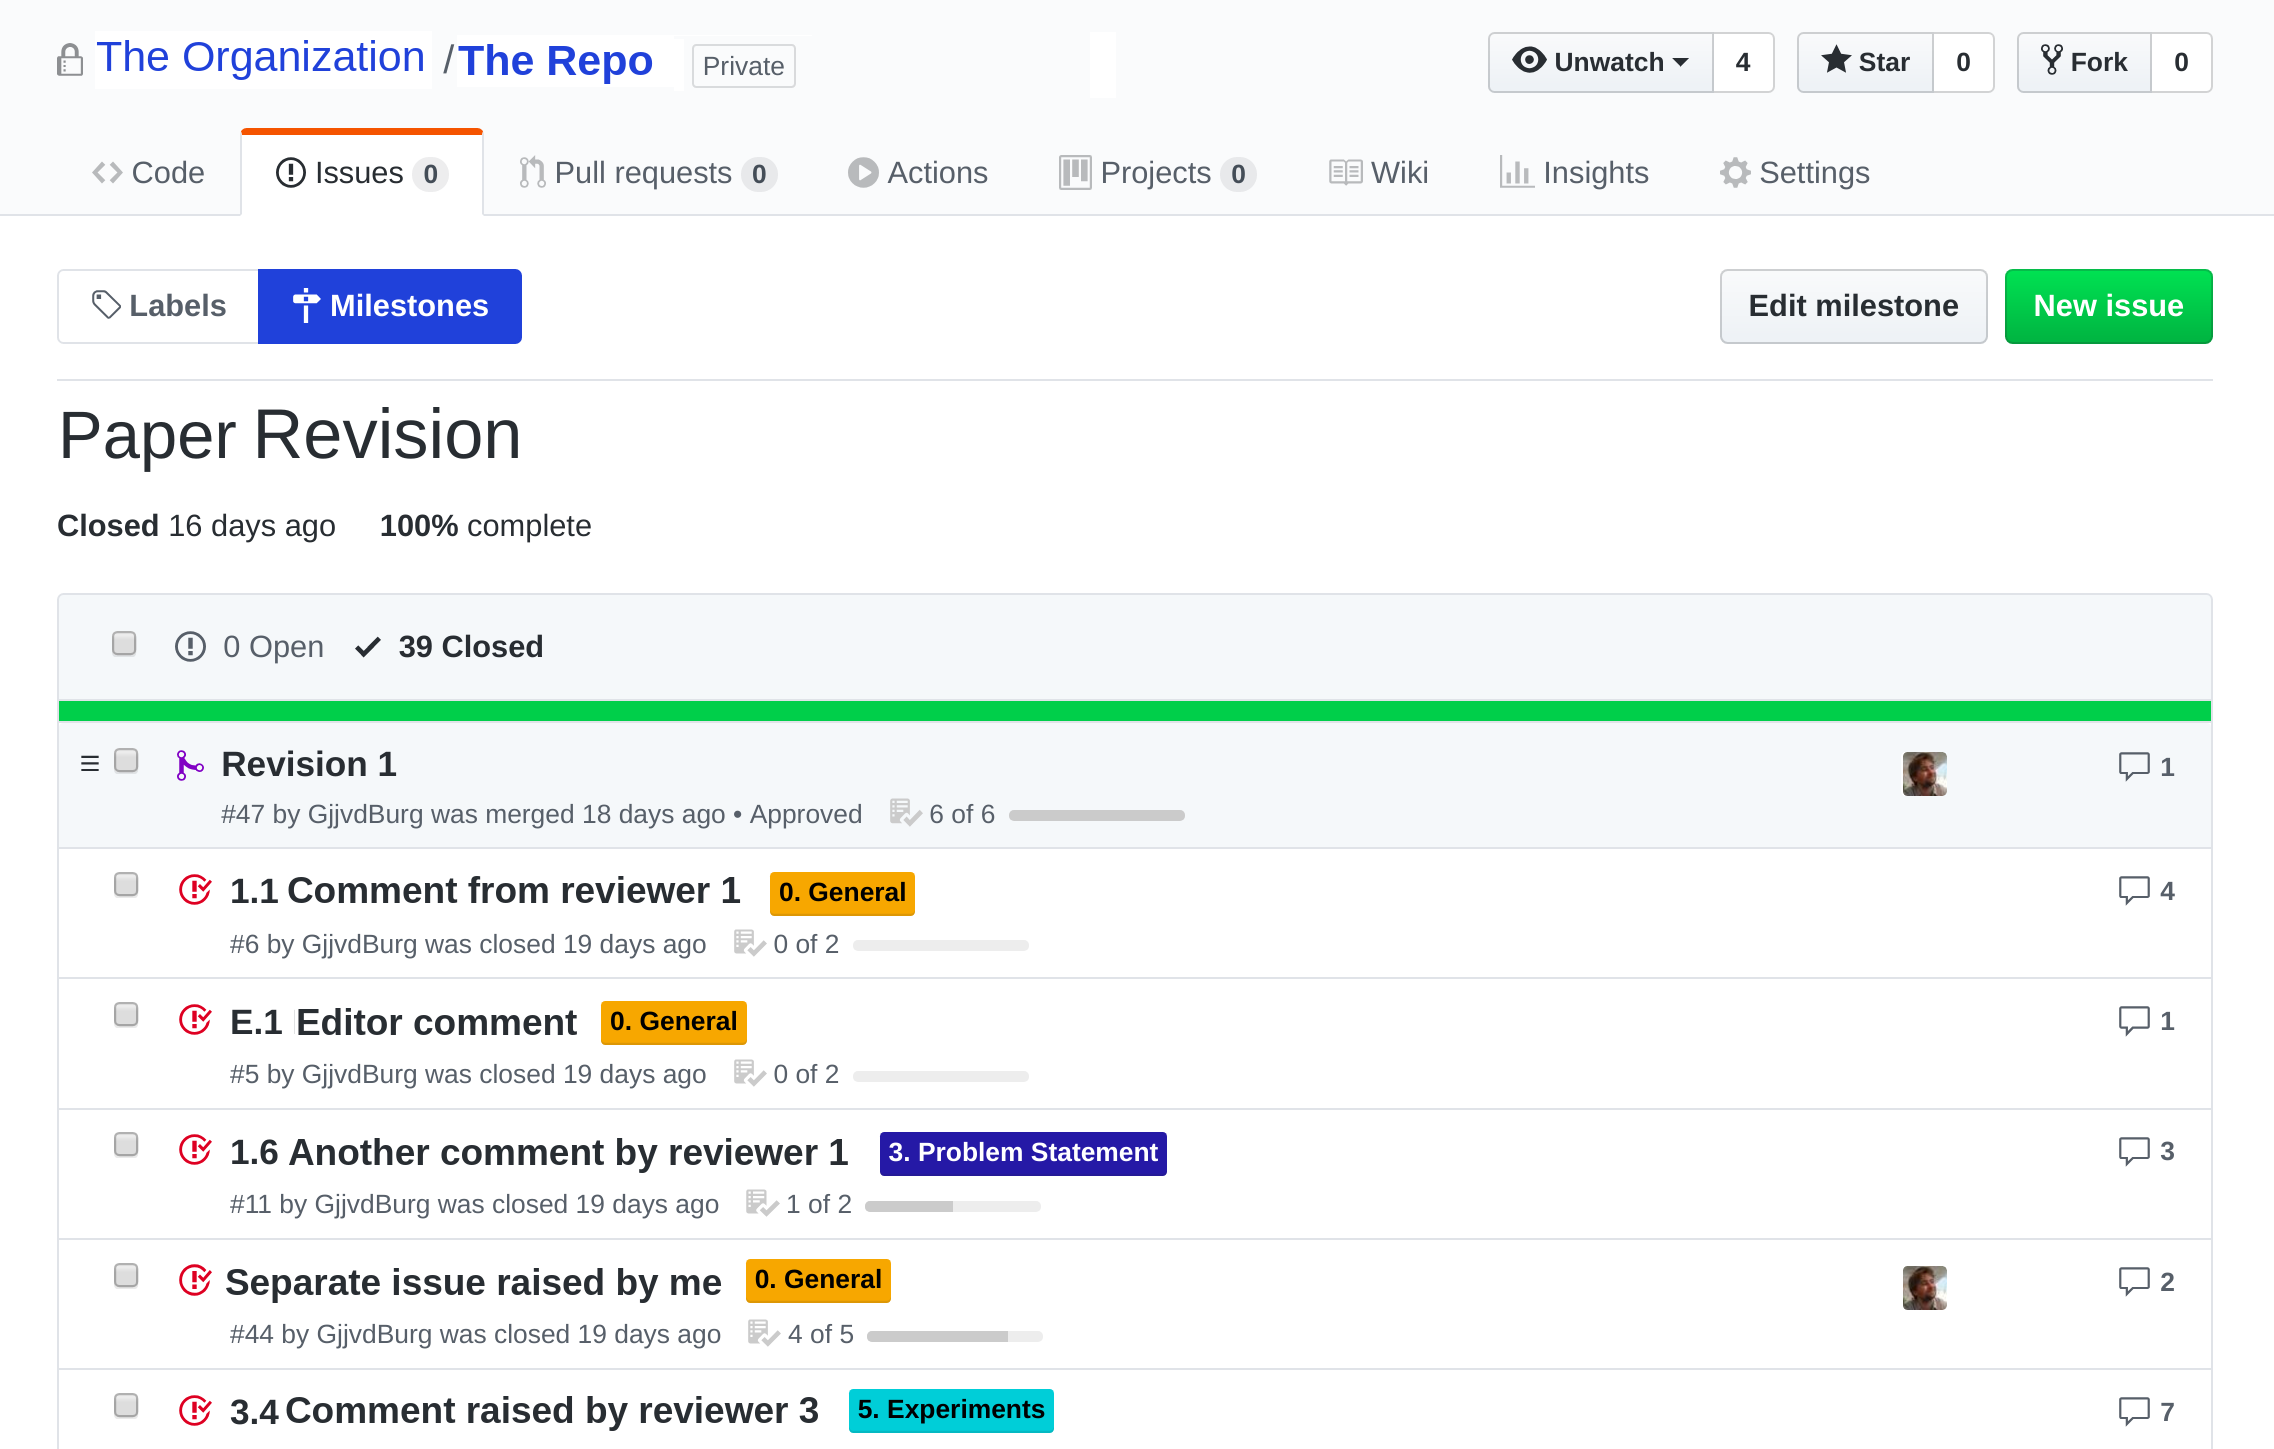 A screenshot showing part of the "milestone" view on GitHub, illustrating the idea. All issues are now closed, but during the process the milestone view provided a nice progress bar too (some titles in the image are changed for discretion).